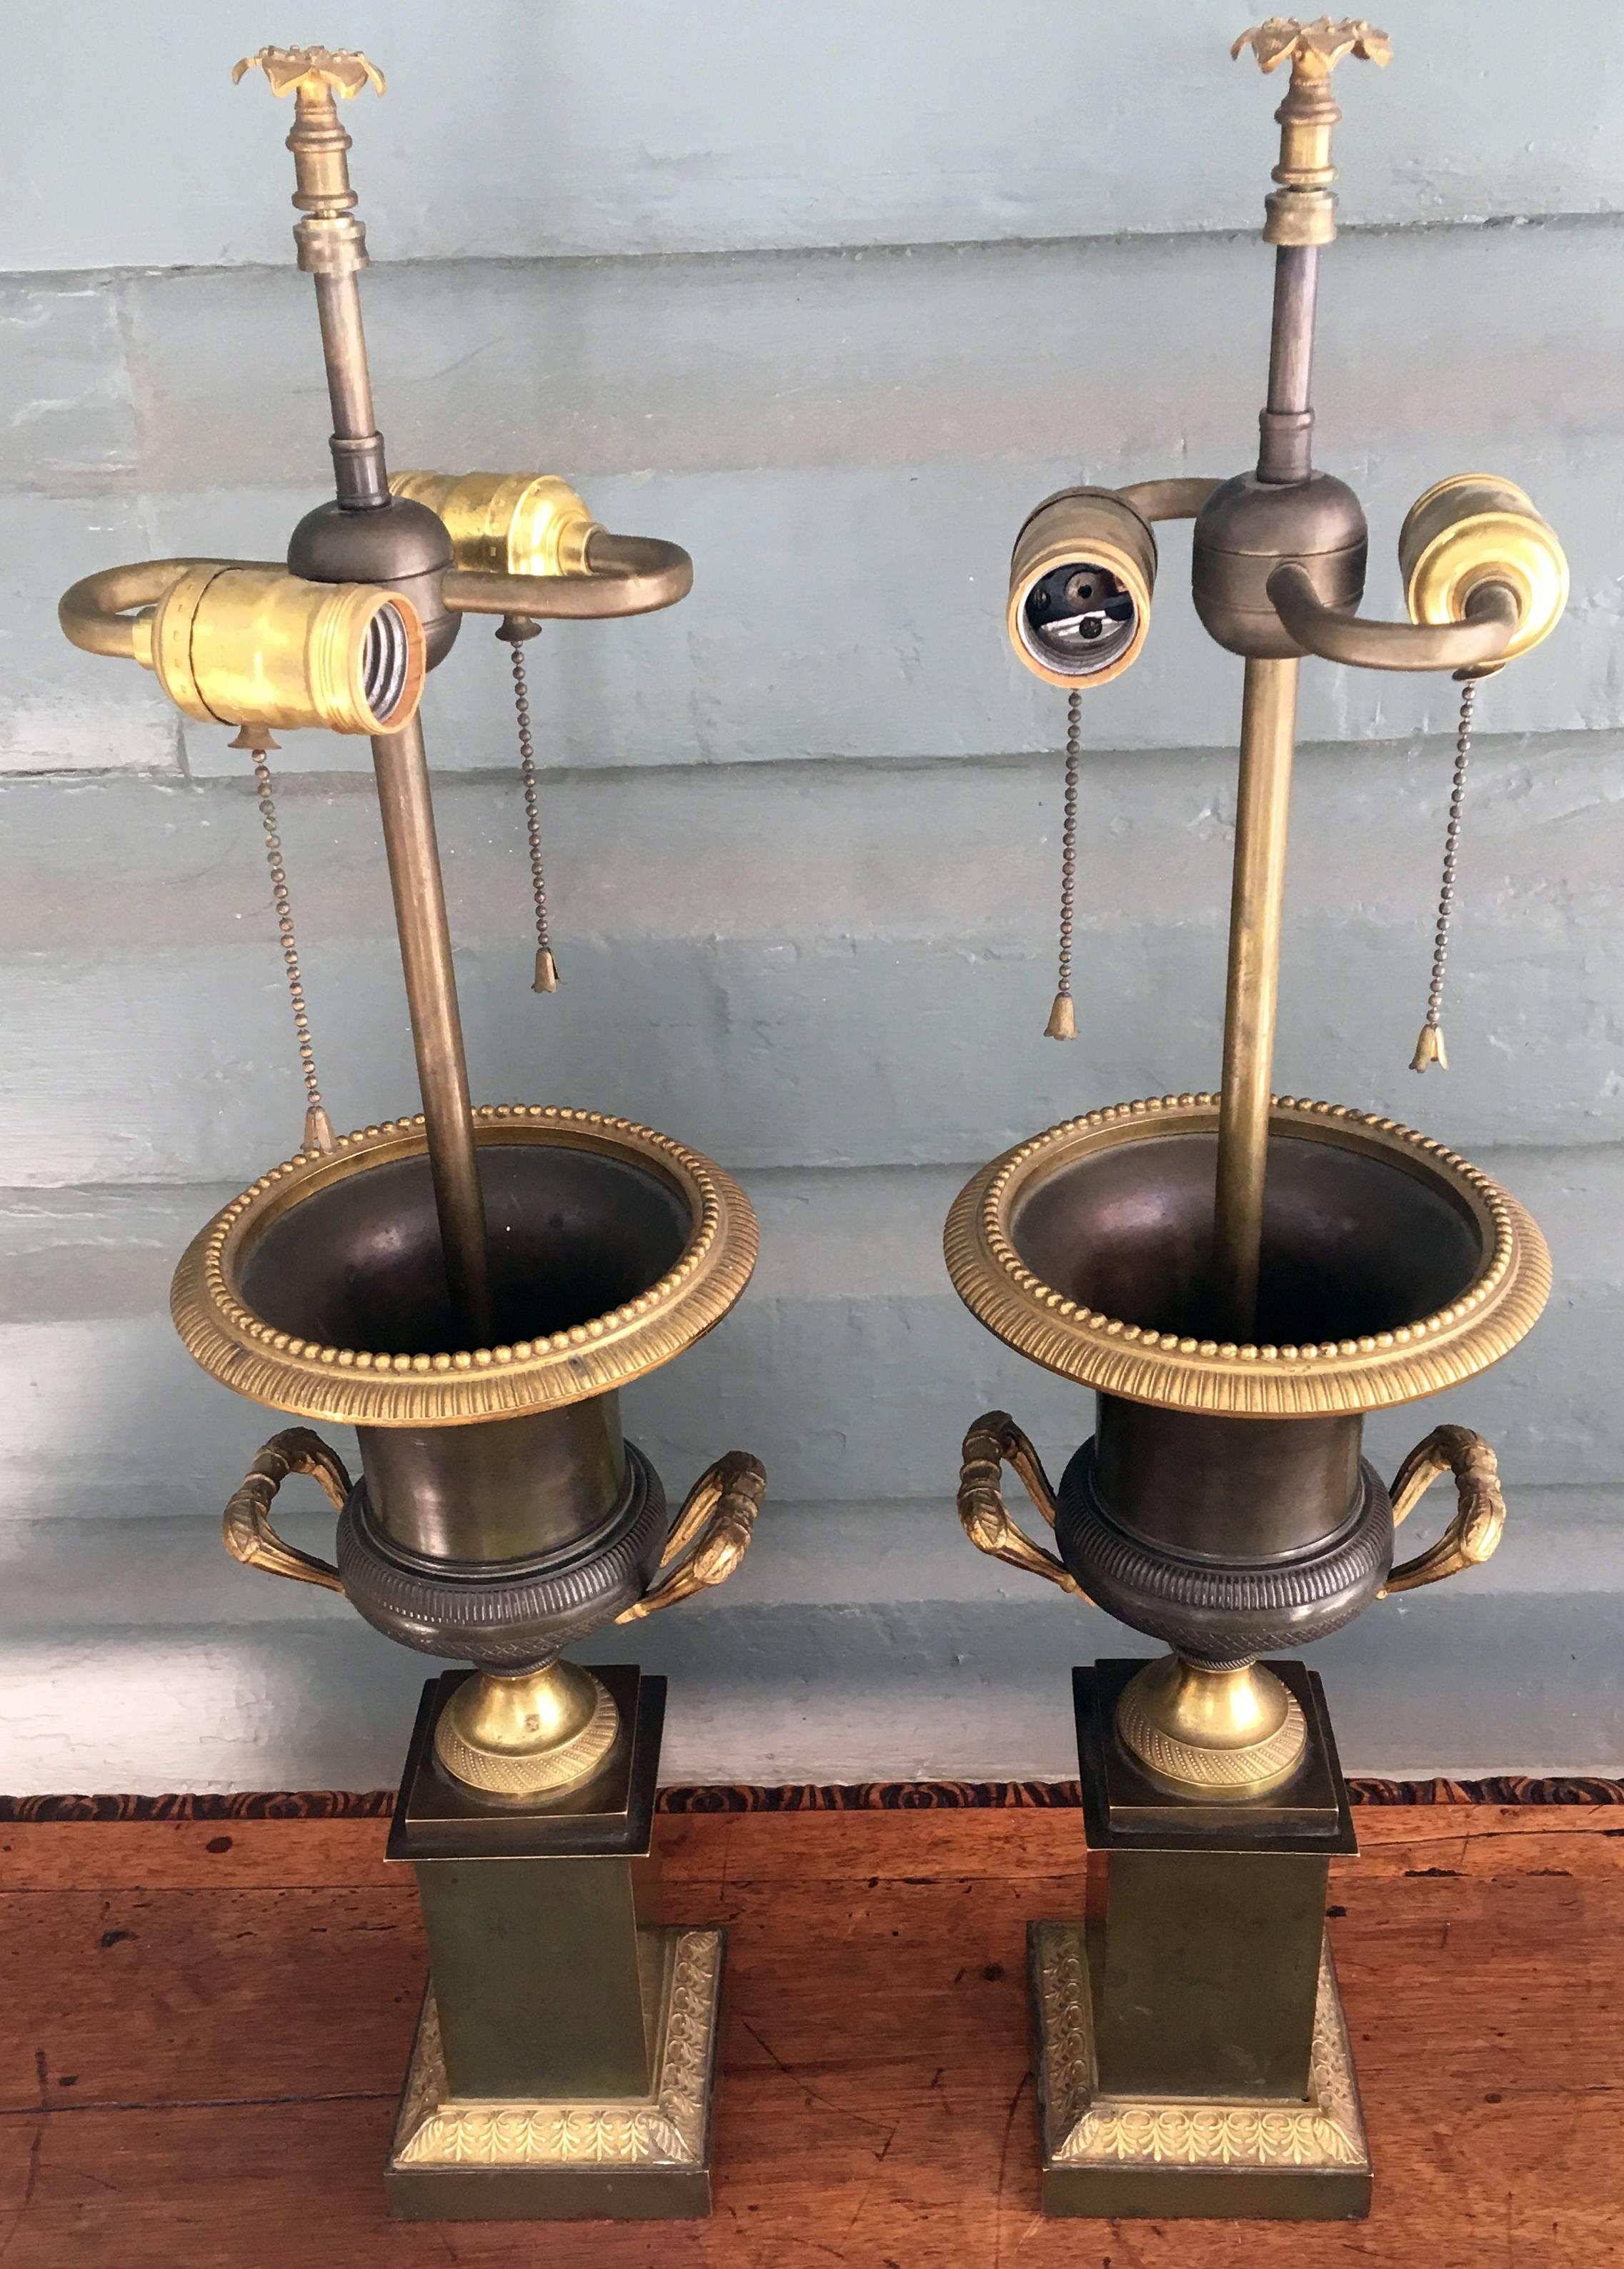 Patinated Bronze and doré bronze French urns, circa 1810, transformed into lamps. The urns having molded and beaded rims with cast bronze handles supported on plinth bases.
Measure: -25.5